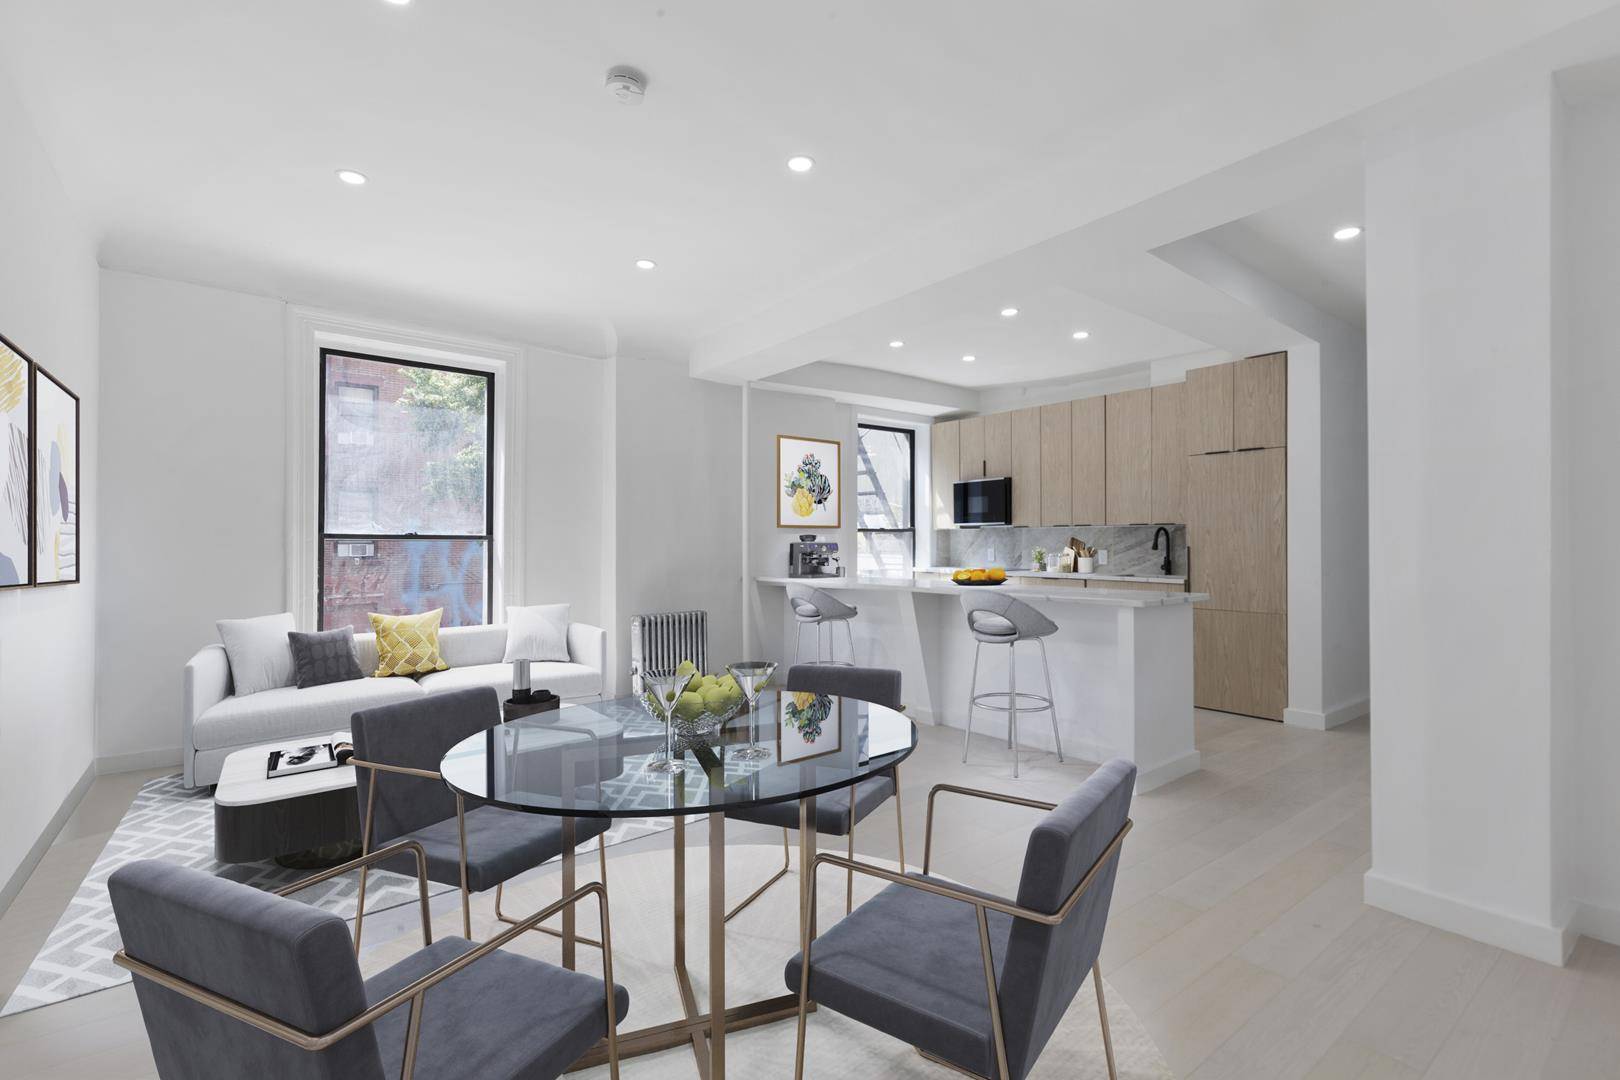 A RARE FIND this brand new, gut renovated apartment in the heart of the East Village boasts polish, charm, and optimal convenience.